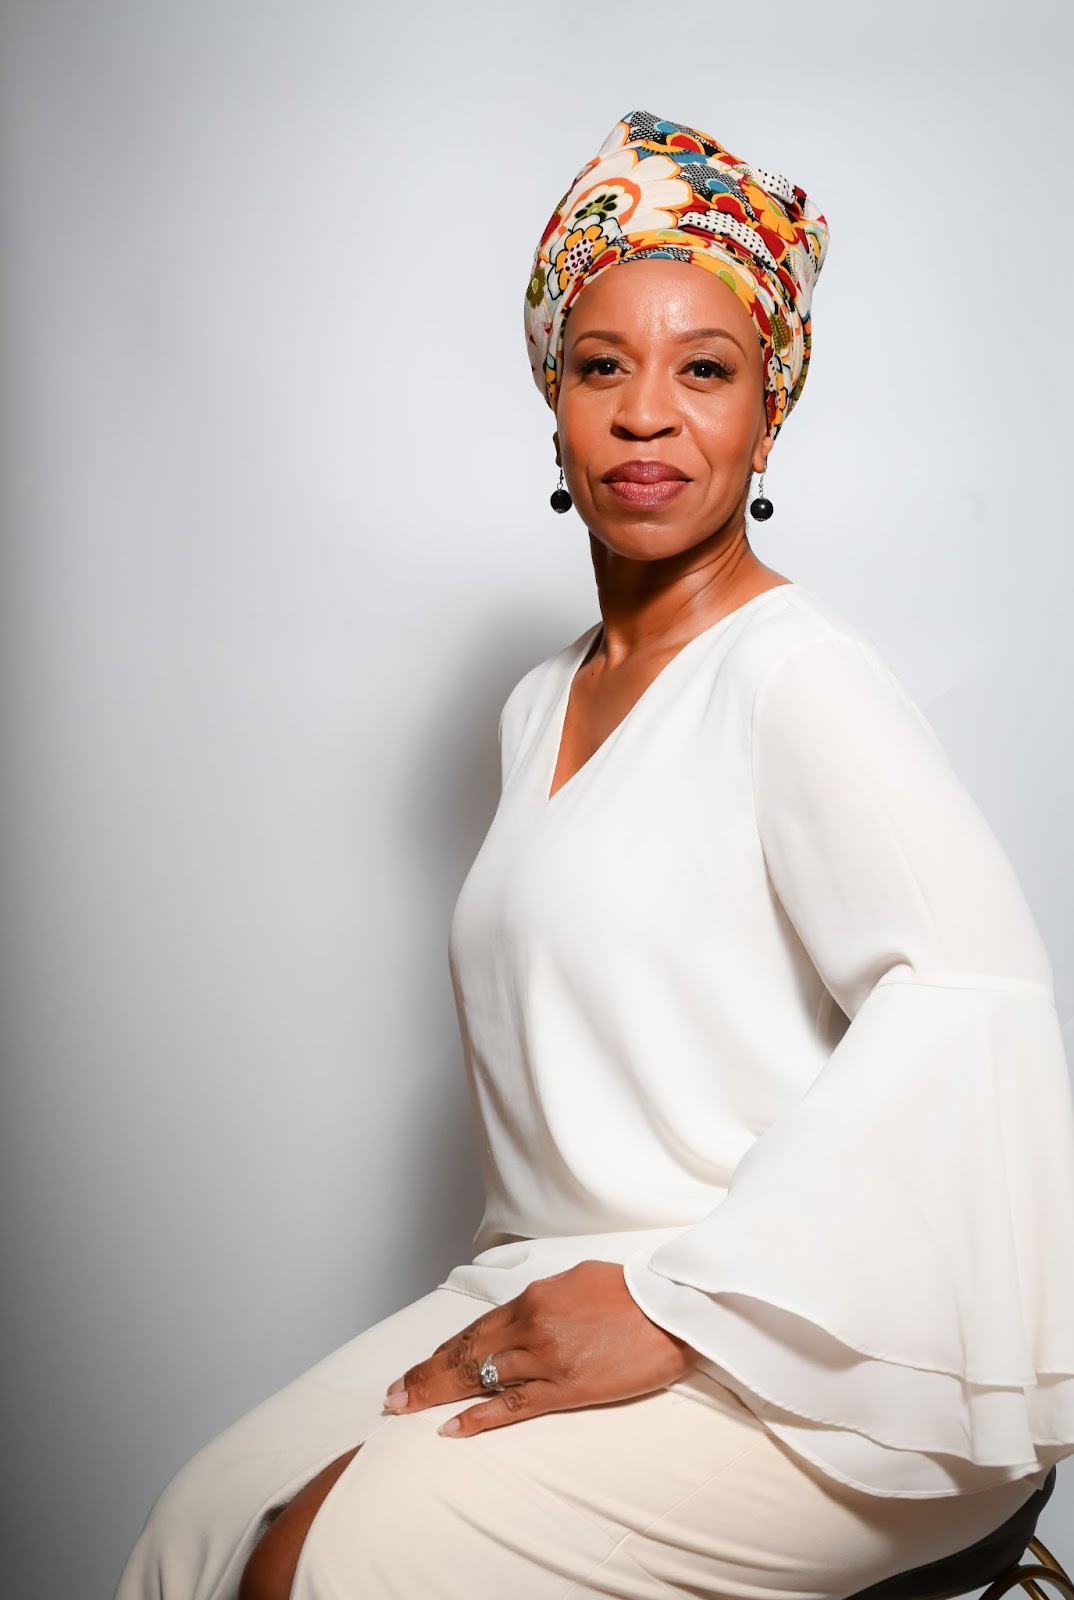 Black woman with a multicolored headwrap and in a white blouse.